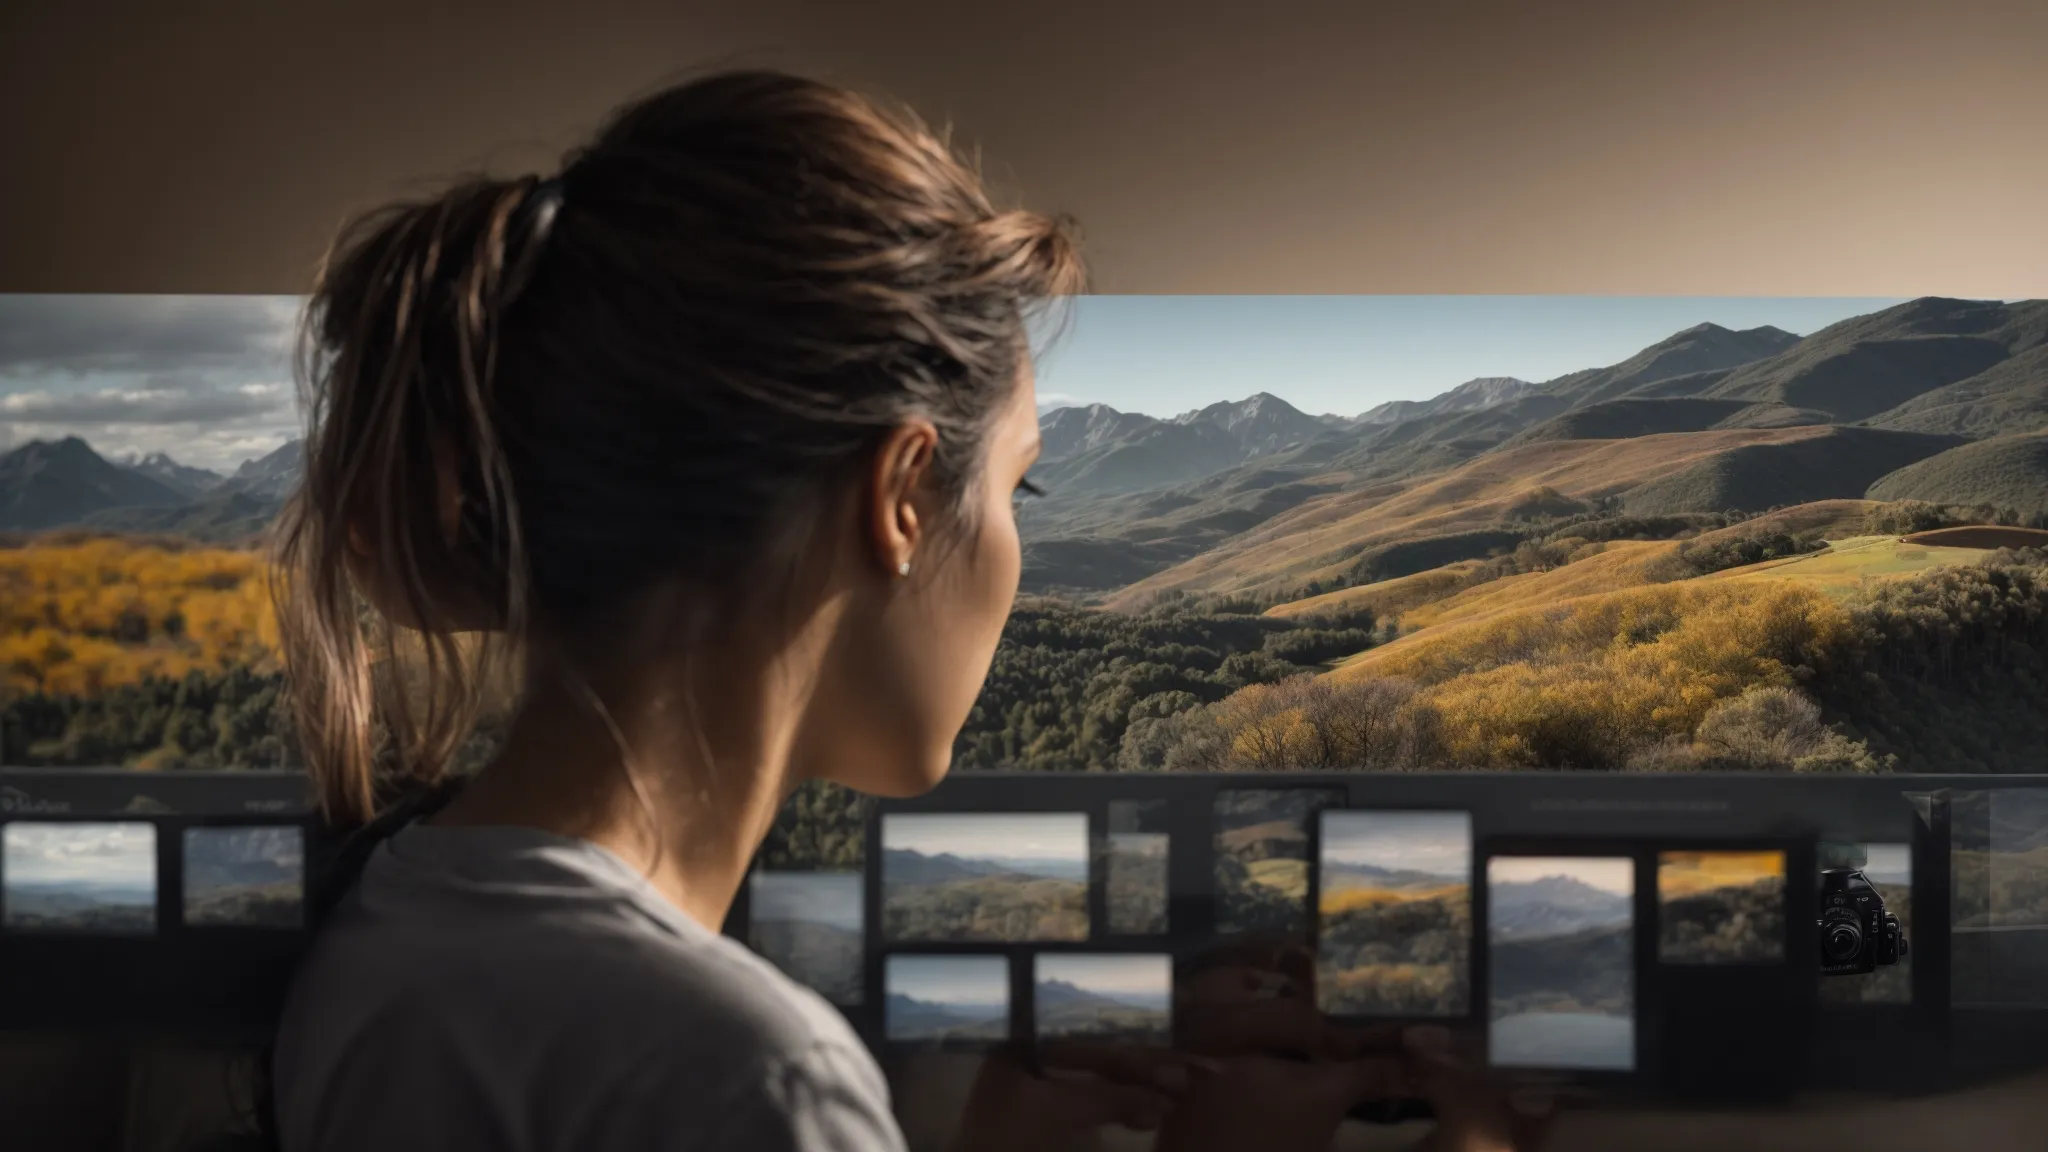 a photographer reviews images on her camera display against a backdrop of scenic landscape, contemplating keyword tagging for better search engine visibility.